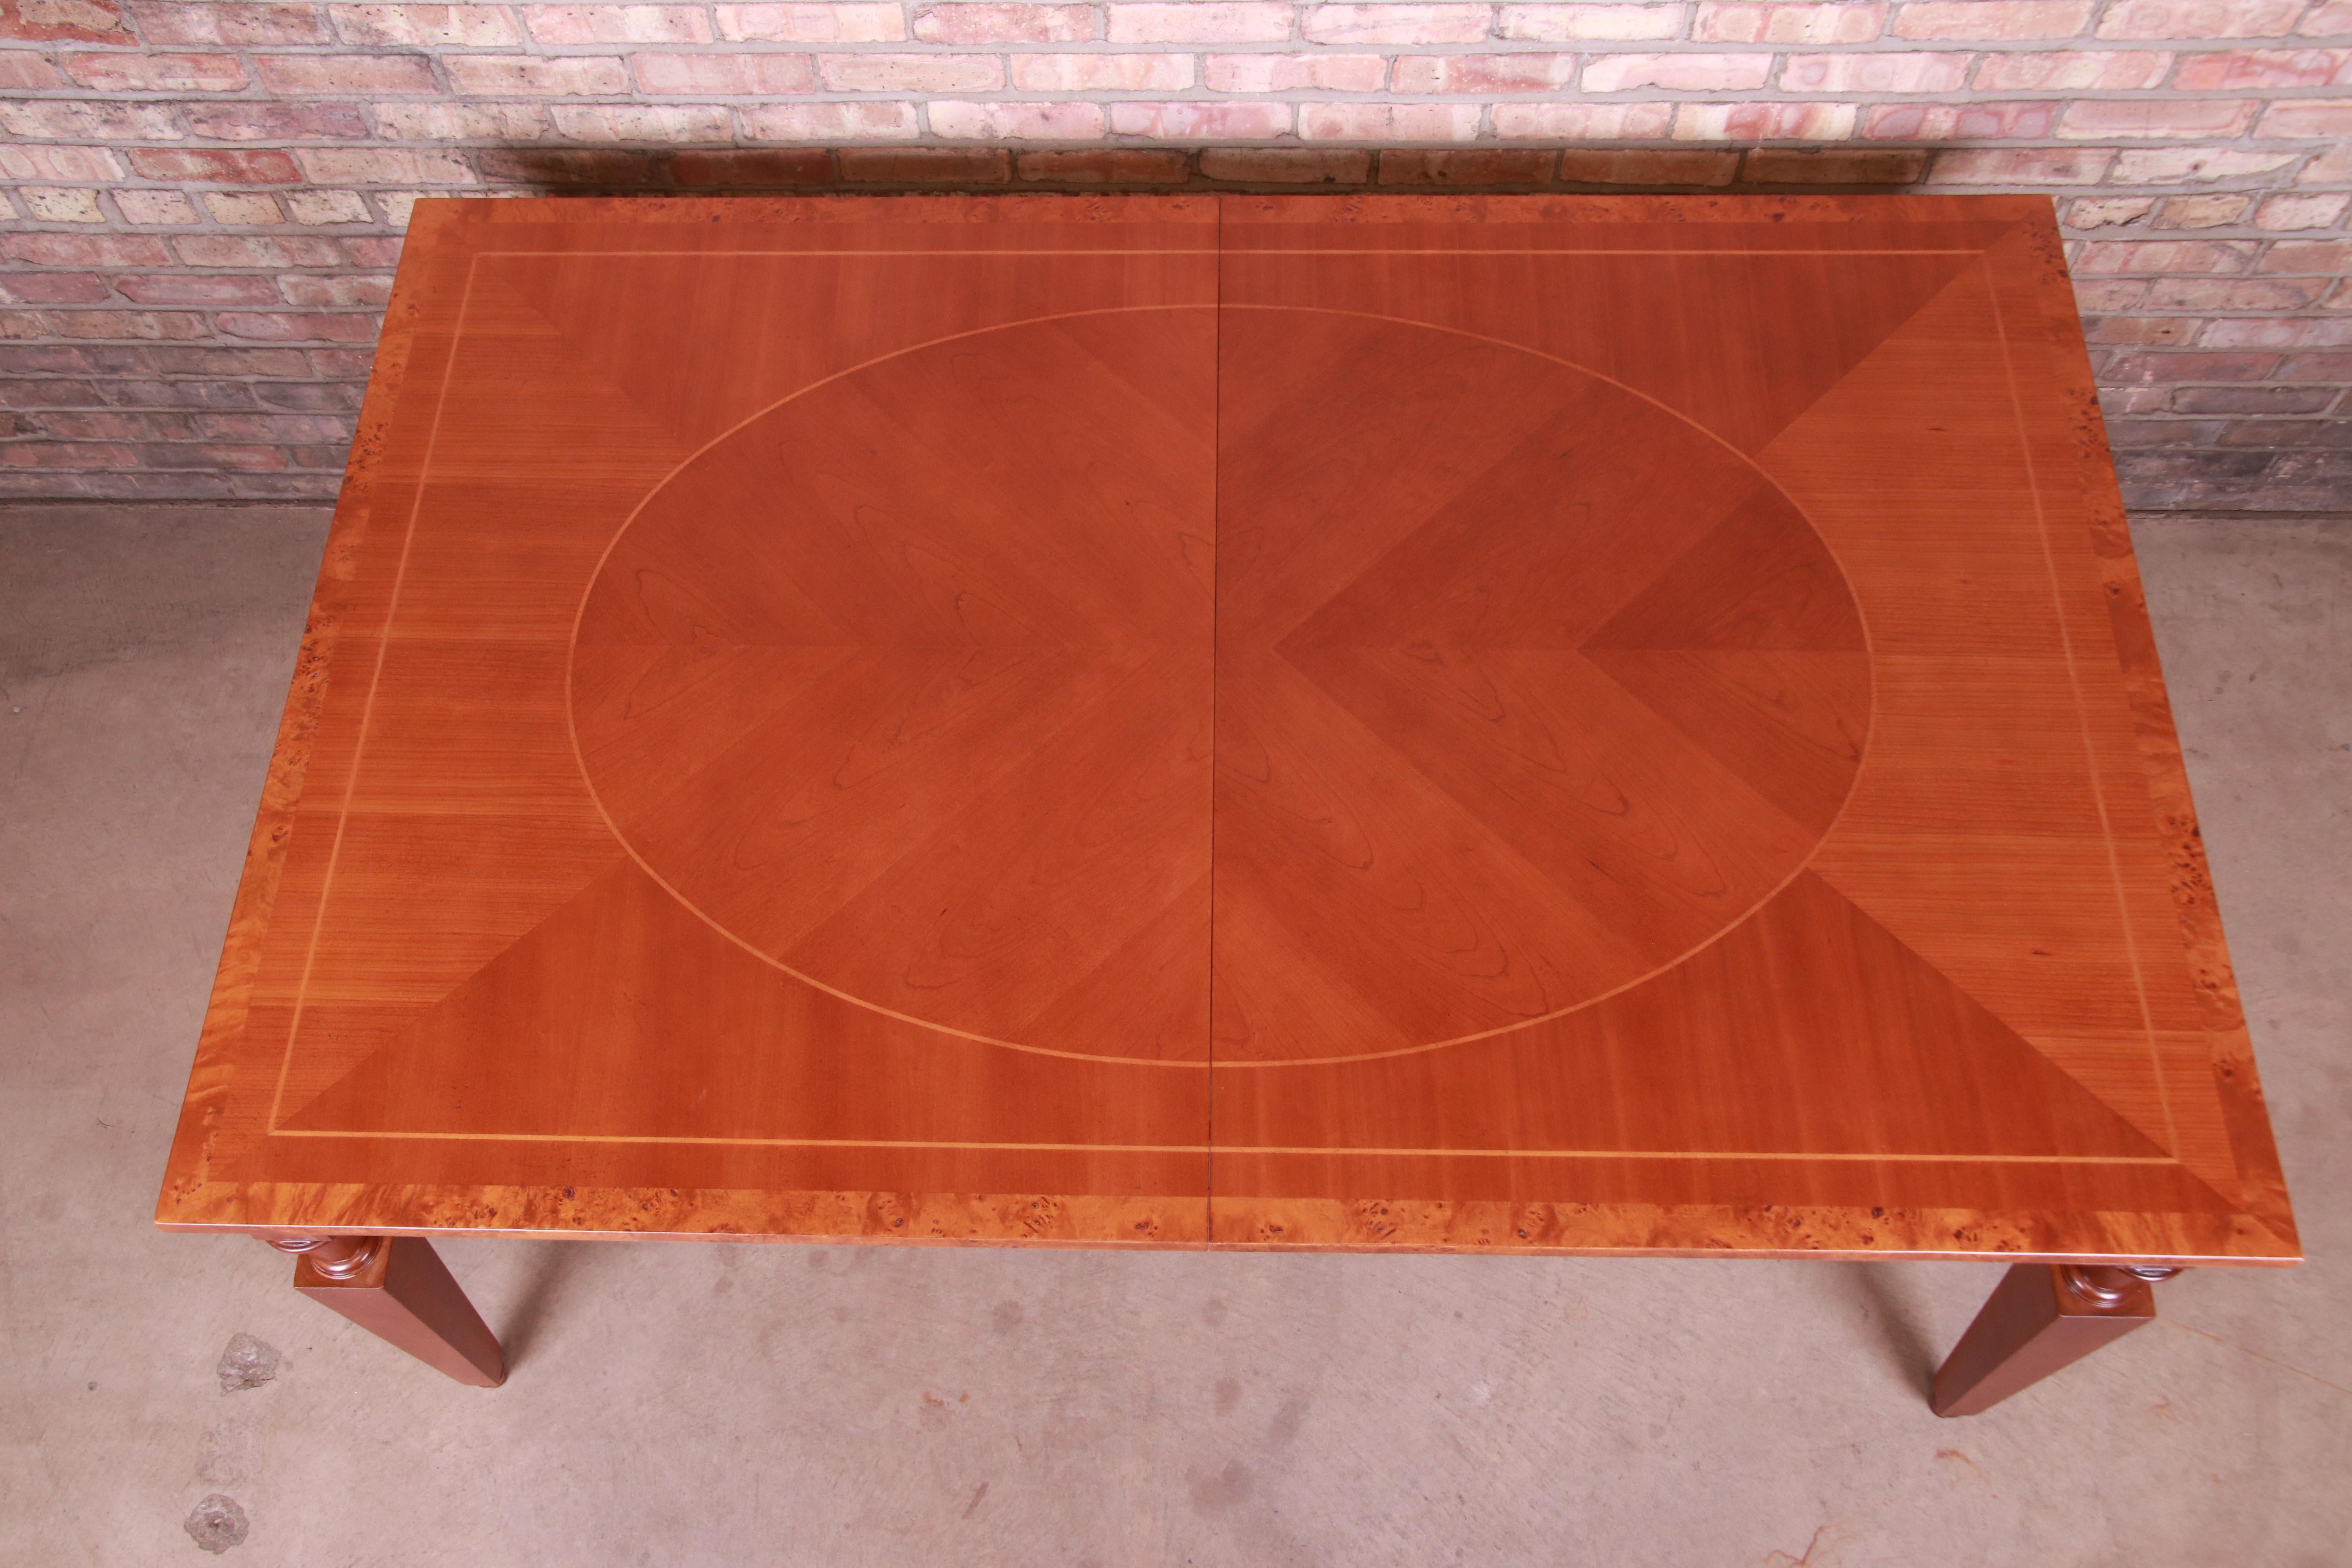 20th Century Baker Furniture Neoclassical Inlaid Cherry and Burl Wood Extension Dining Table For Sale